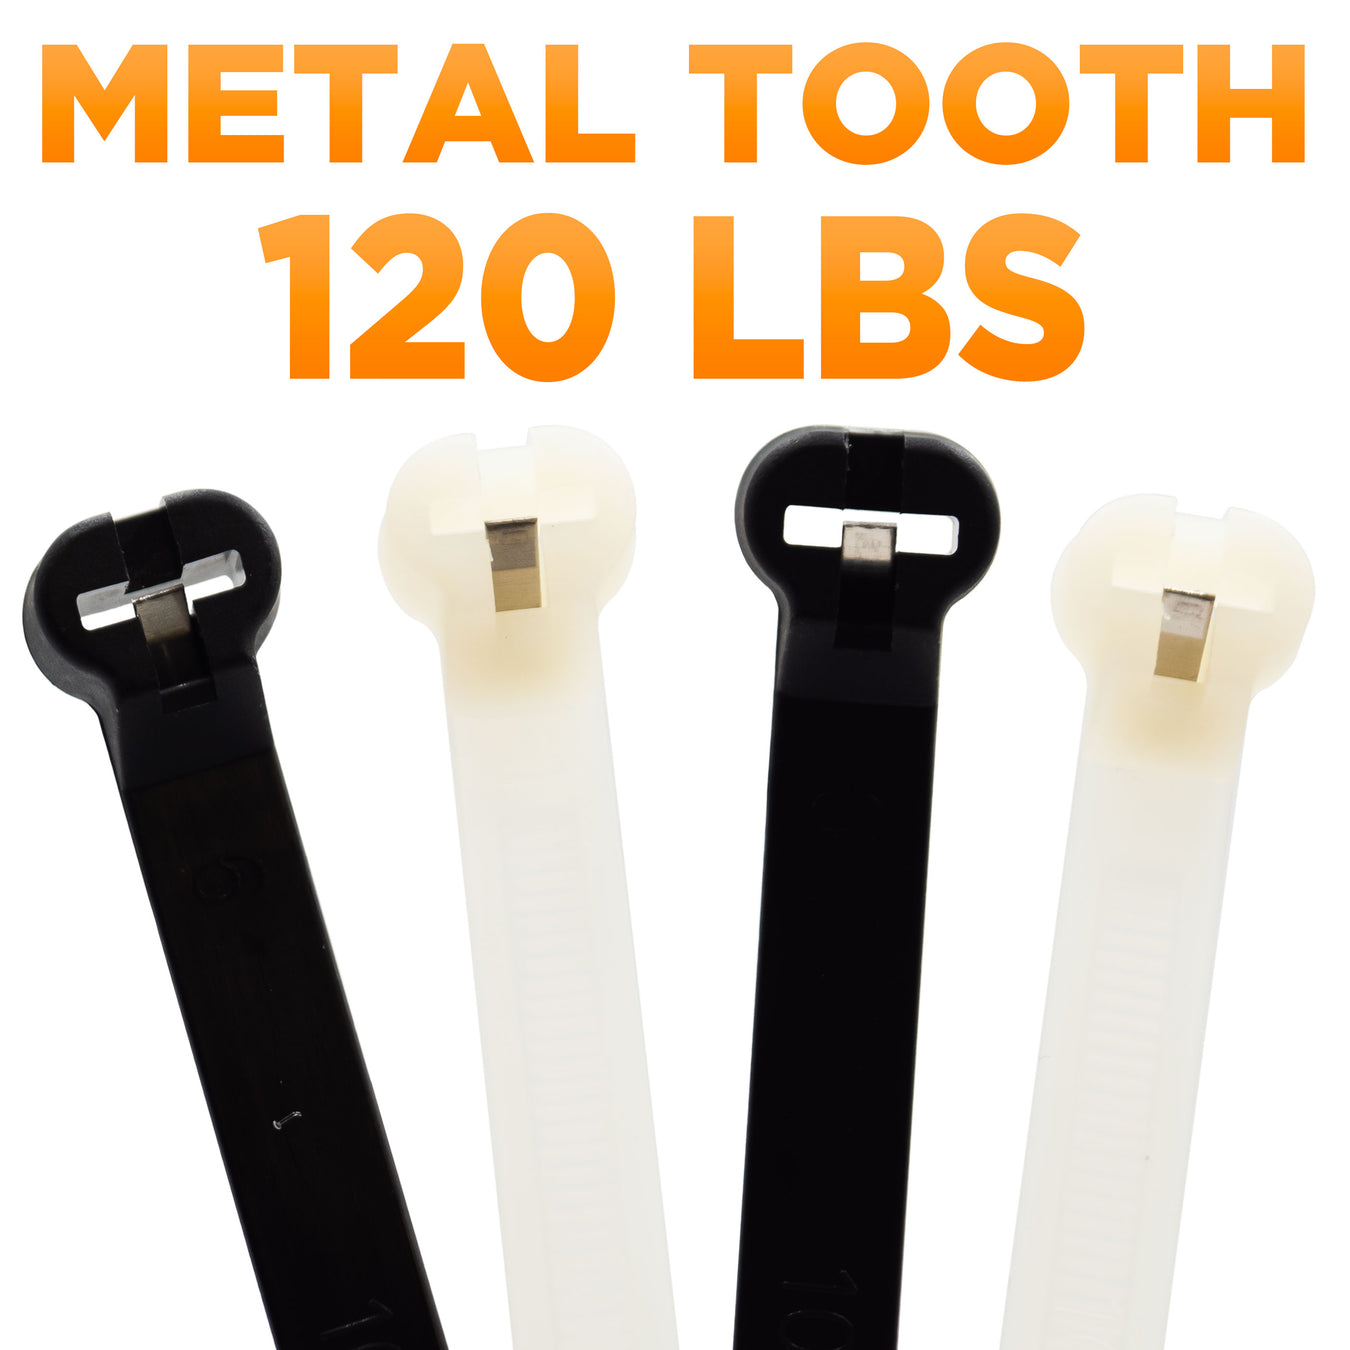 Metal Tooth Cable Ties